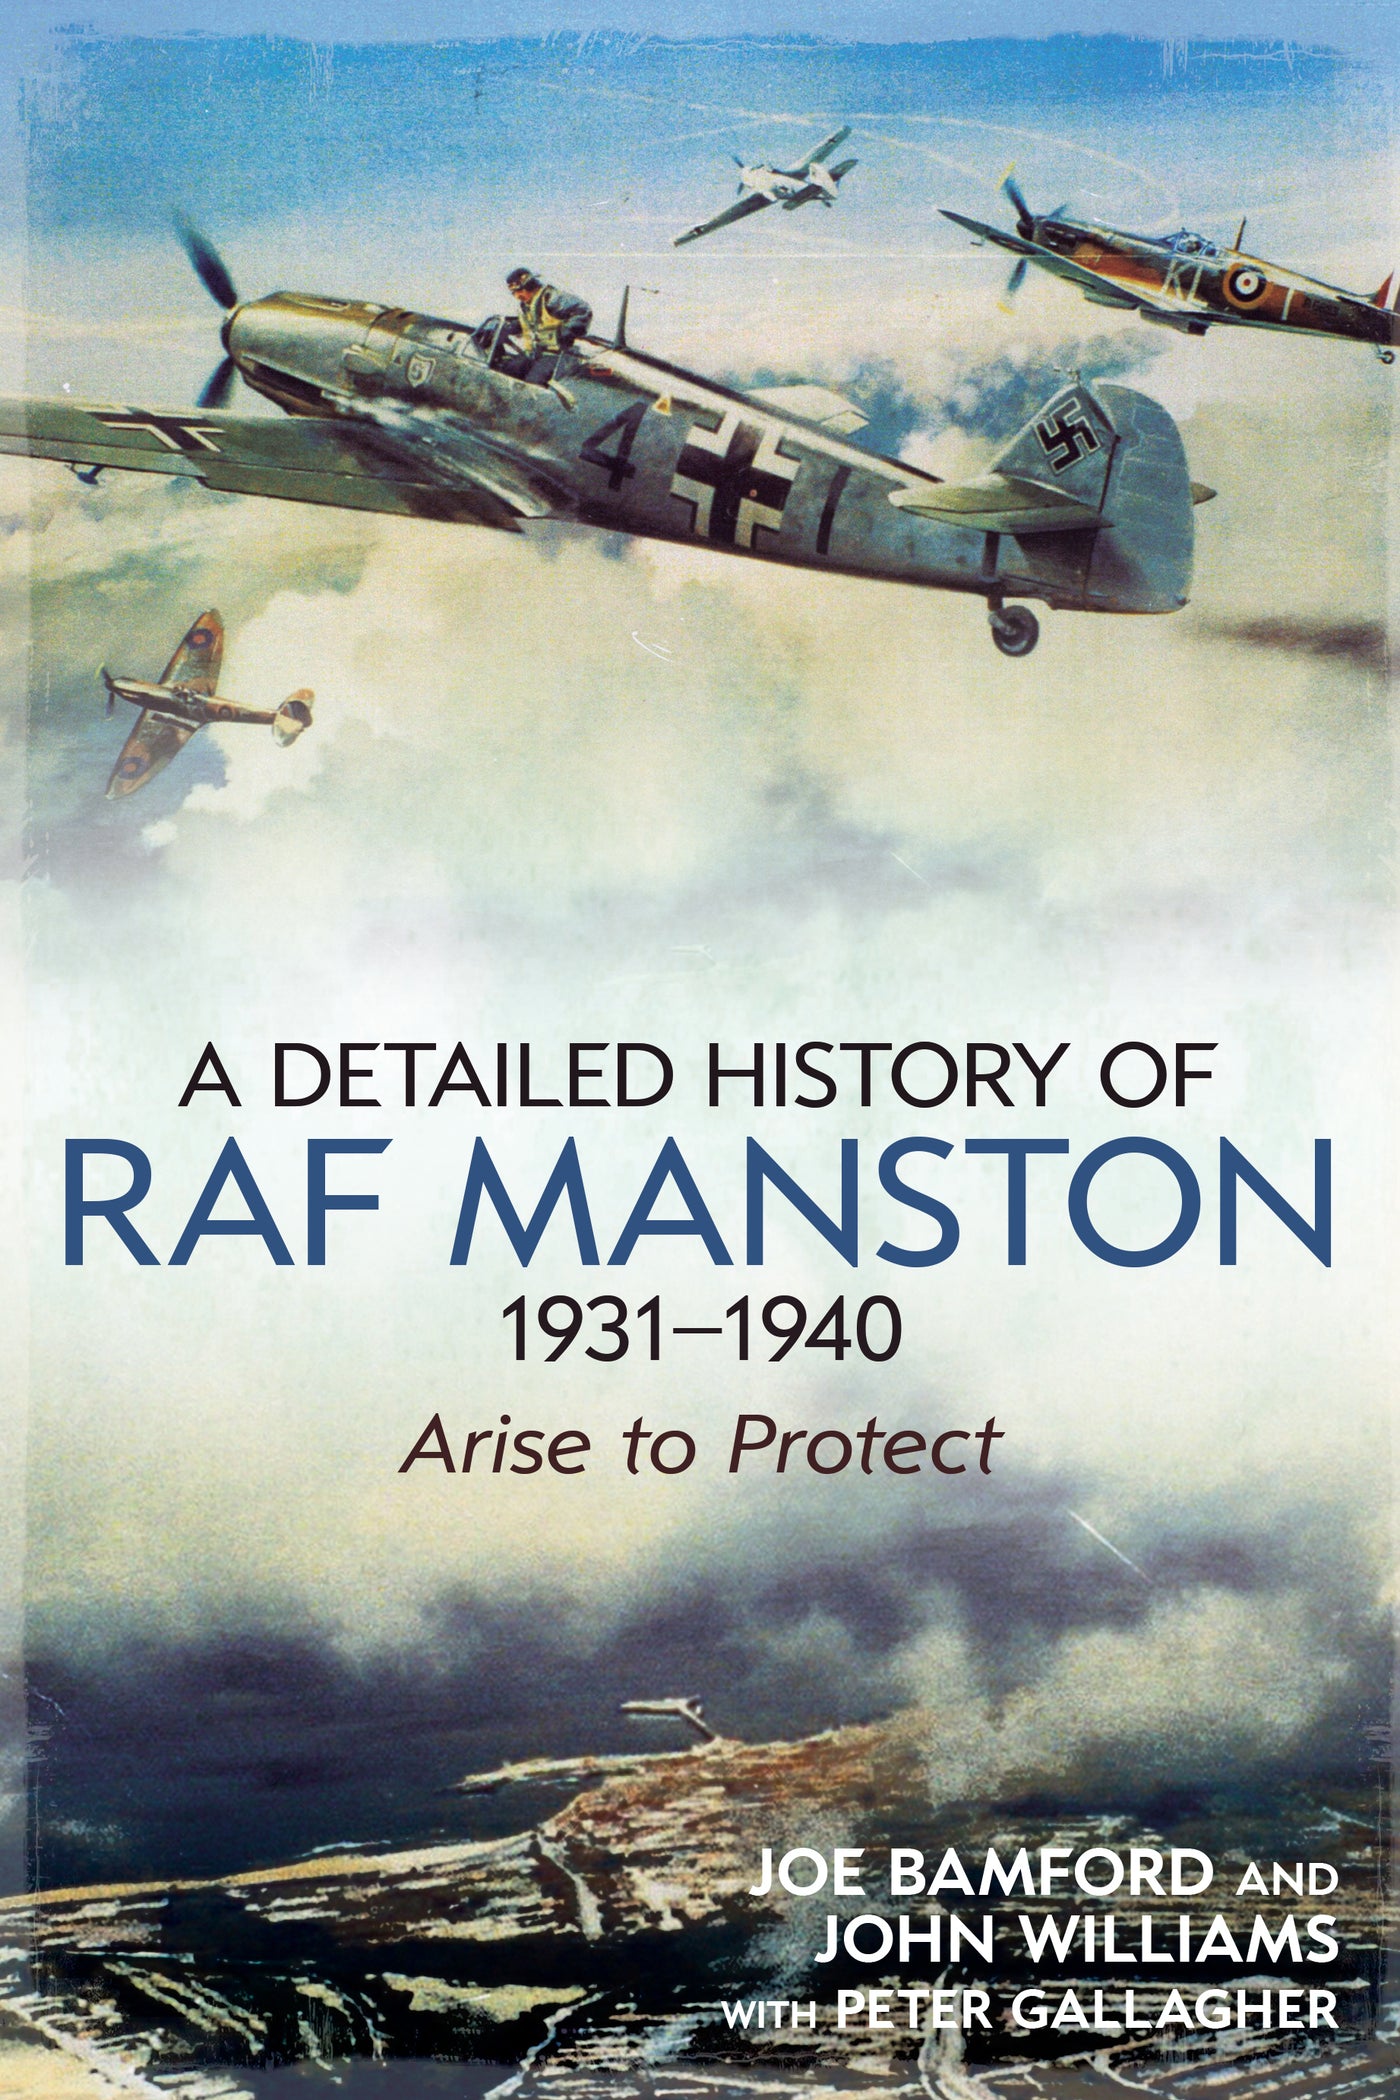 The Detailed History of RAF Manston 1931-40